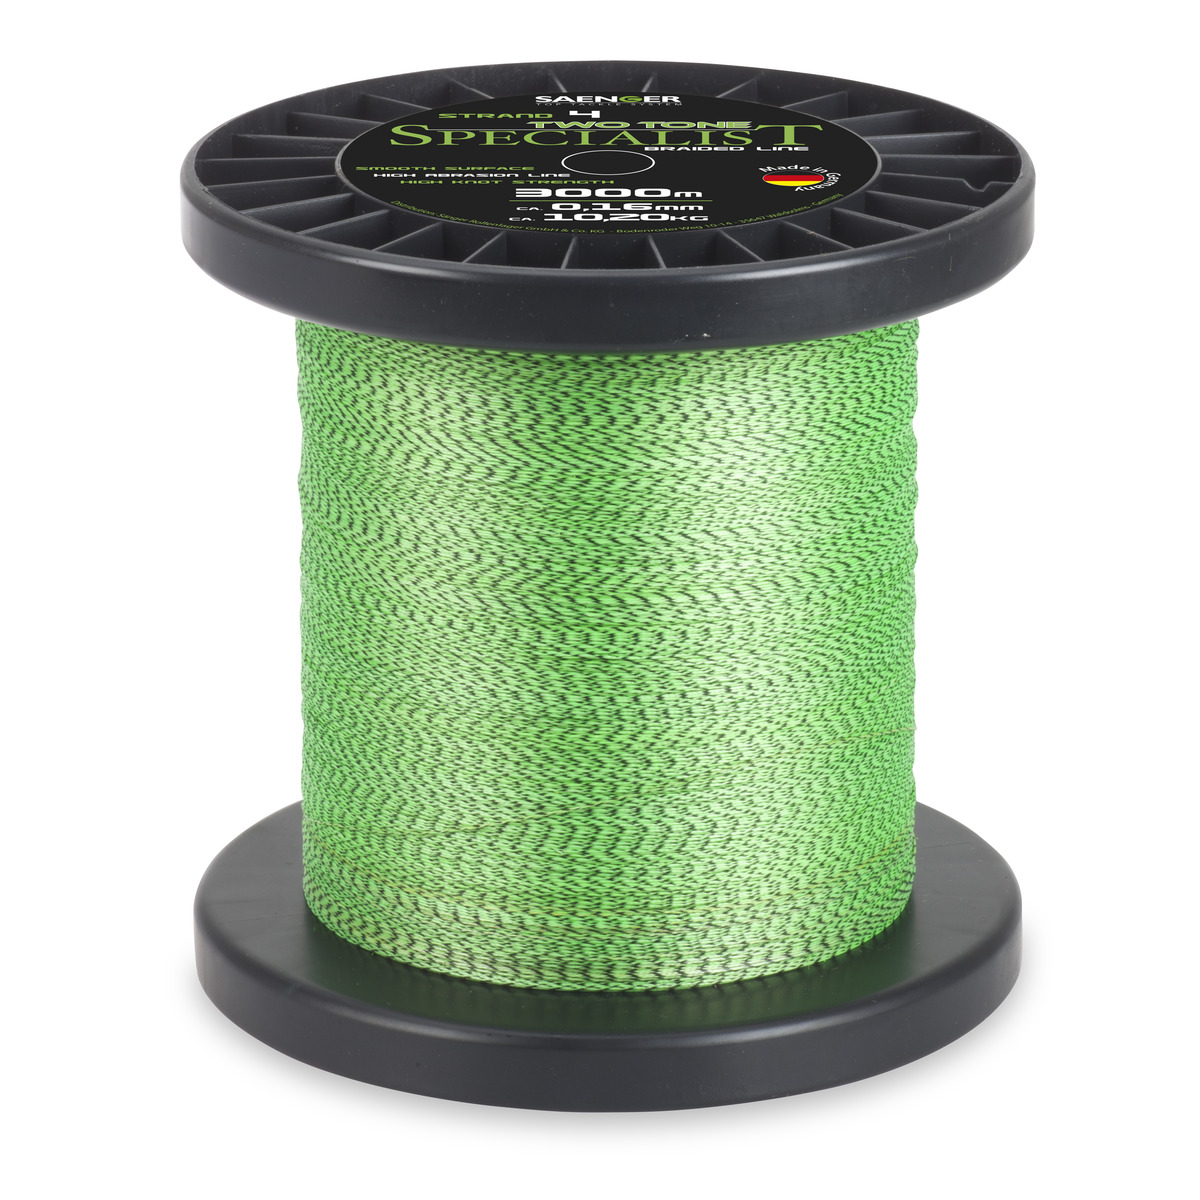 Saenger Specialist Two Tone Fluo Braid - 0,20 mm - 14,5 kg 3000 m